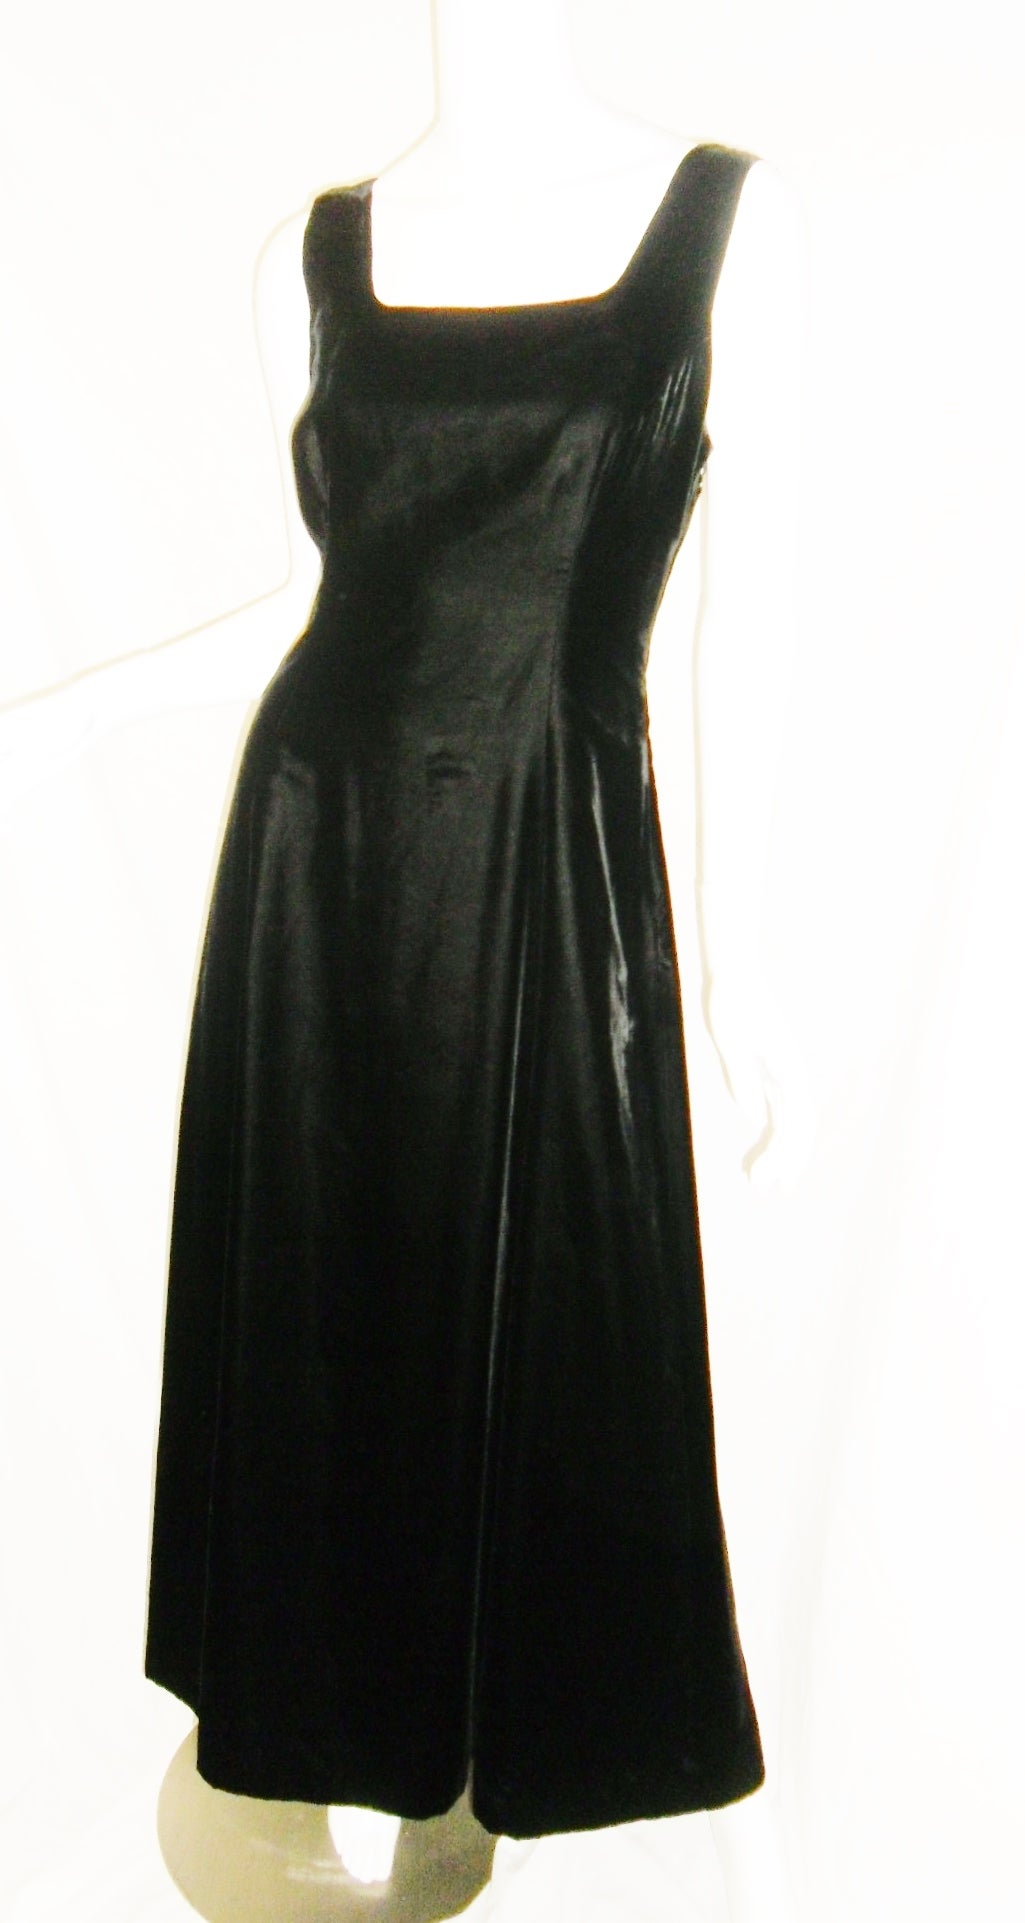 Simplicity and elegance of Giorgio Armani. Square neckline sleevless gown with fabulous flow bottom. Size 42